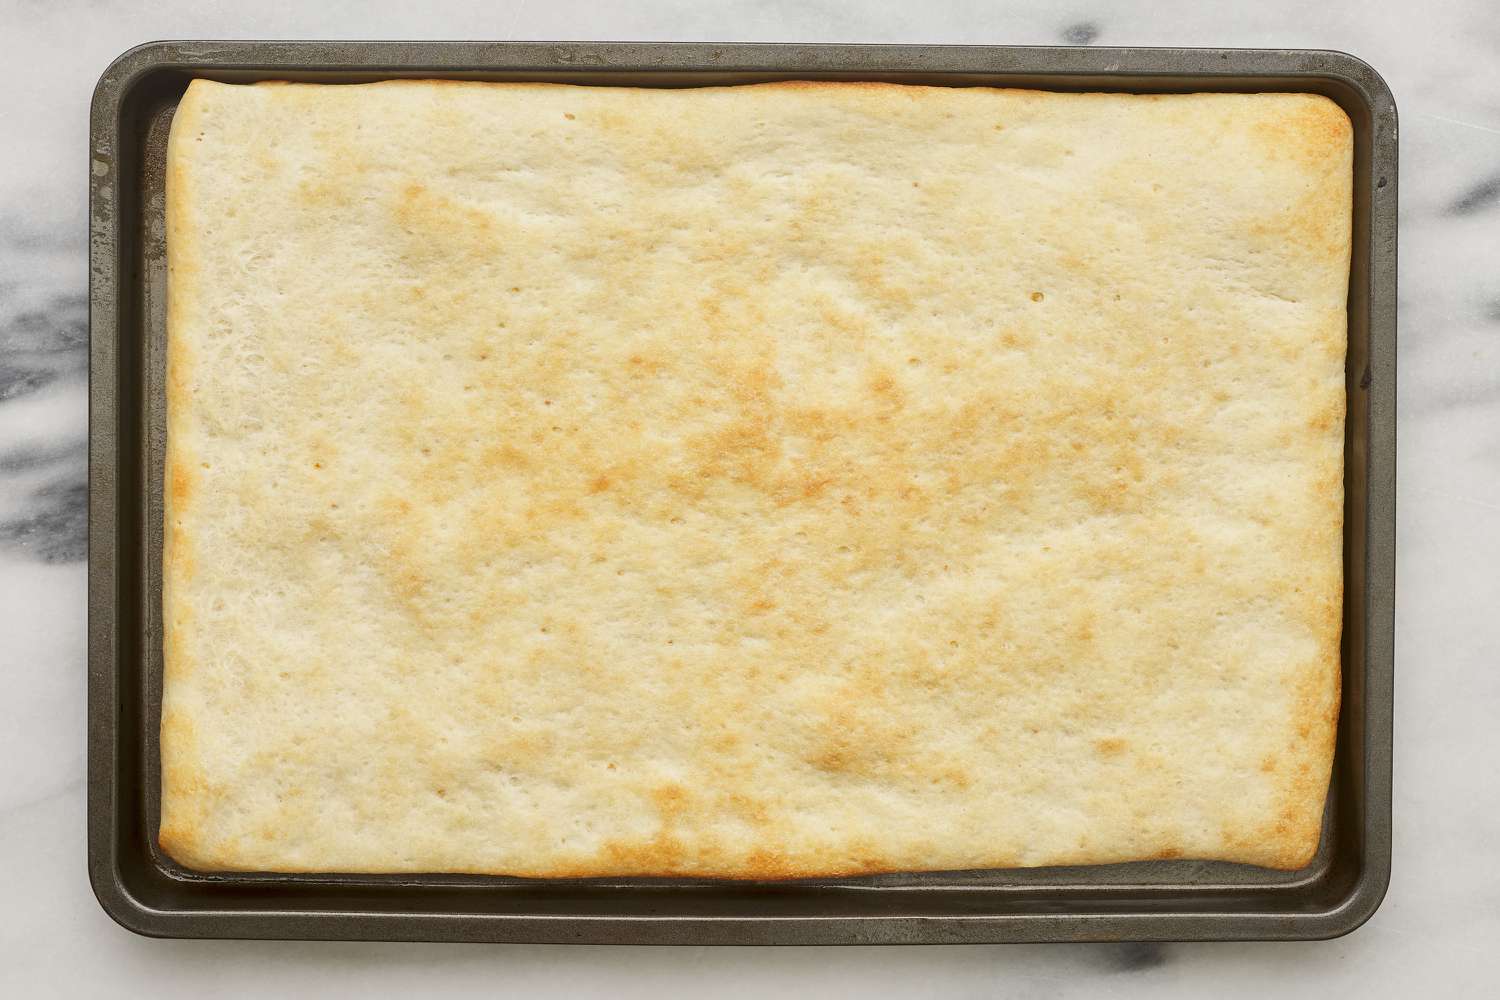 baked pizza crust on sheet tray